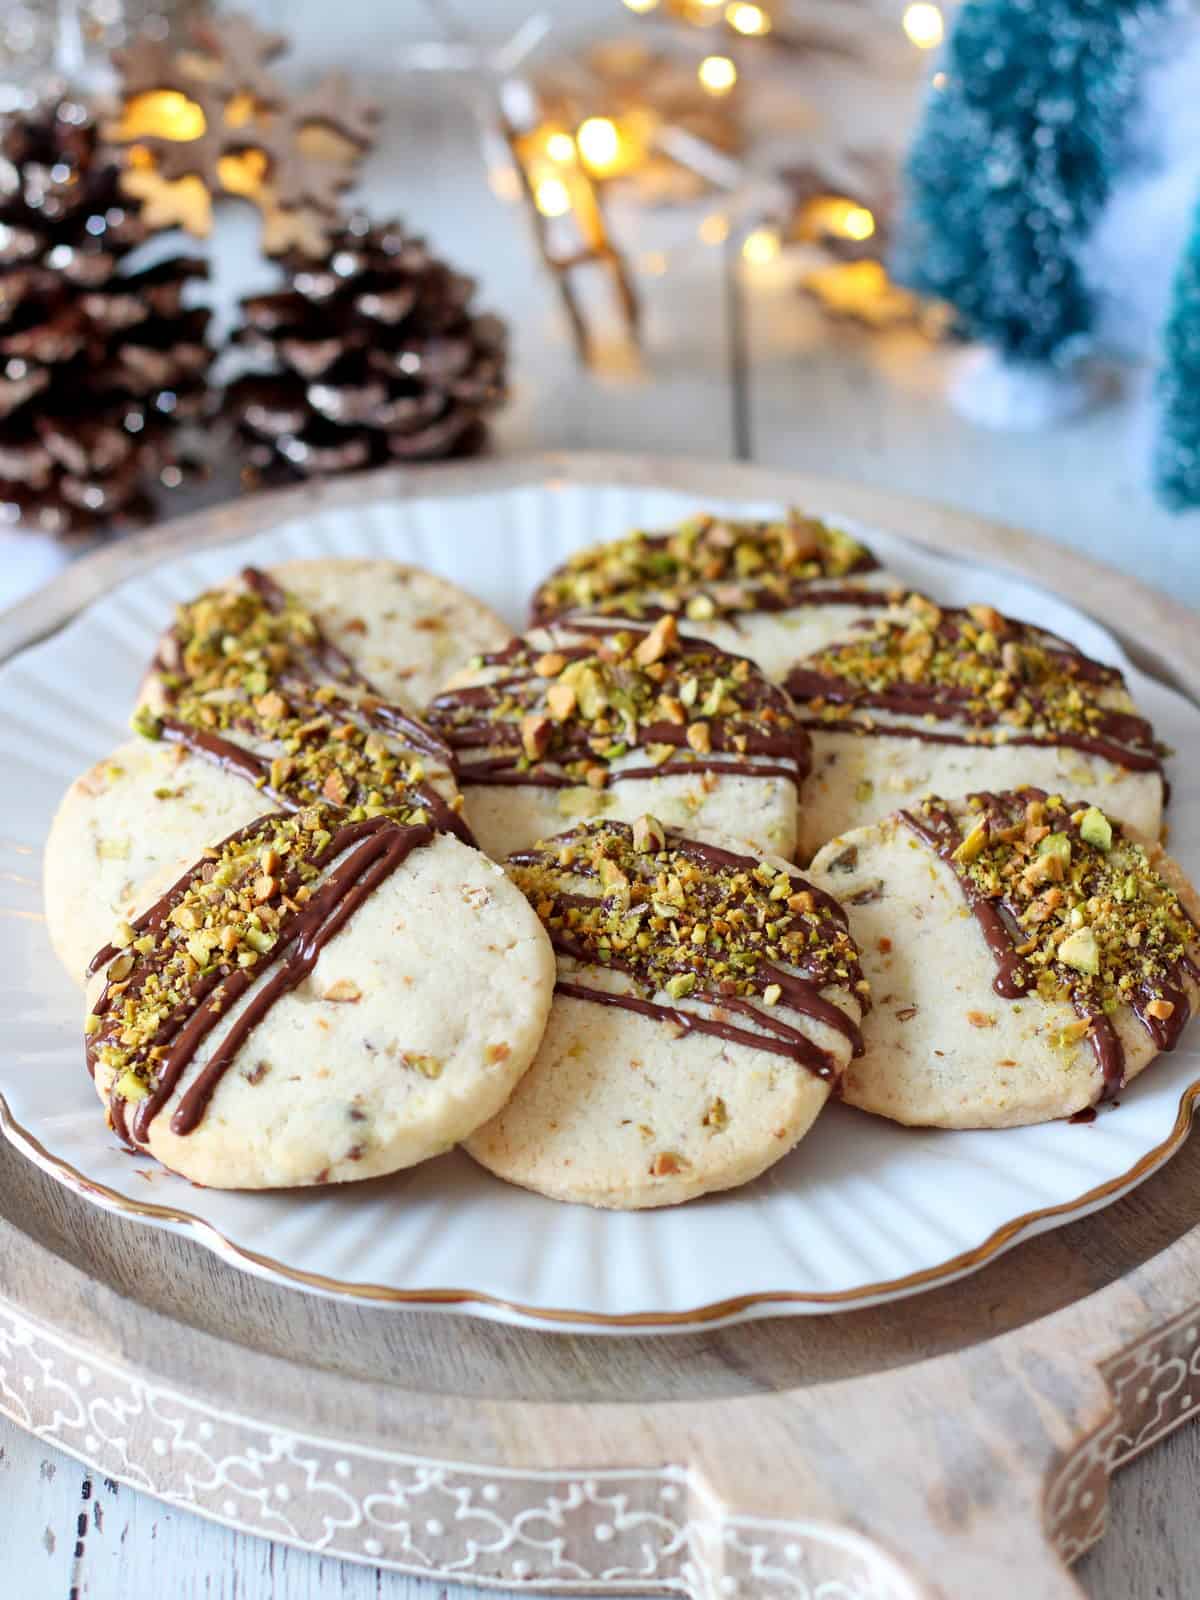 pistachio shortbread cookies drizzled with milk chocolate and placed on white plate with Christmas decoration in background.